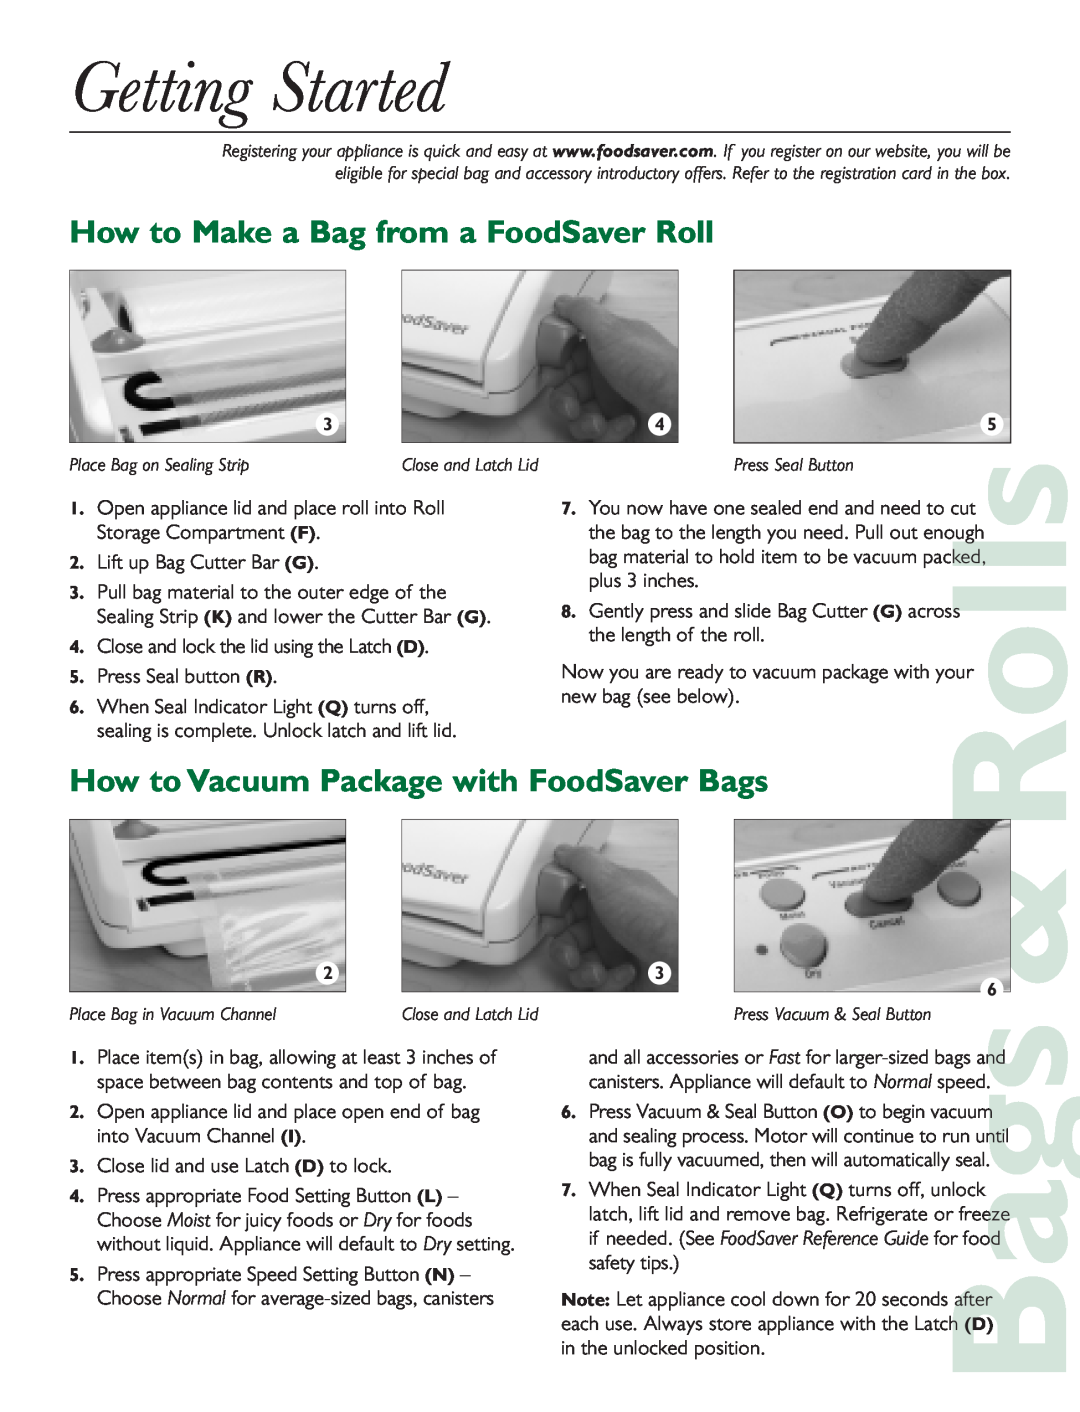 FoodSaver V2480 Getting Started, How to Make a Bag from a FoodSaver Roll, How to Vacuum Package with FoodSaver Bags, Rolls 